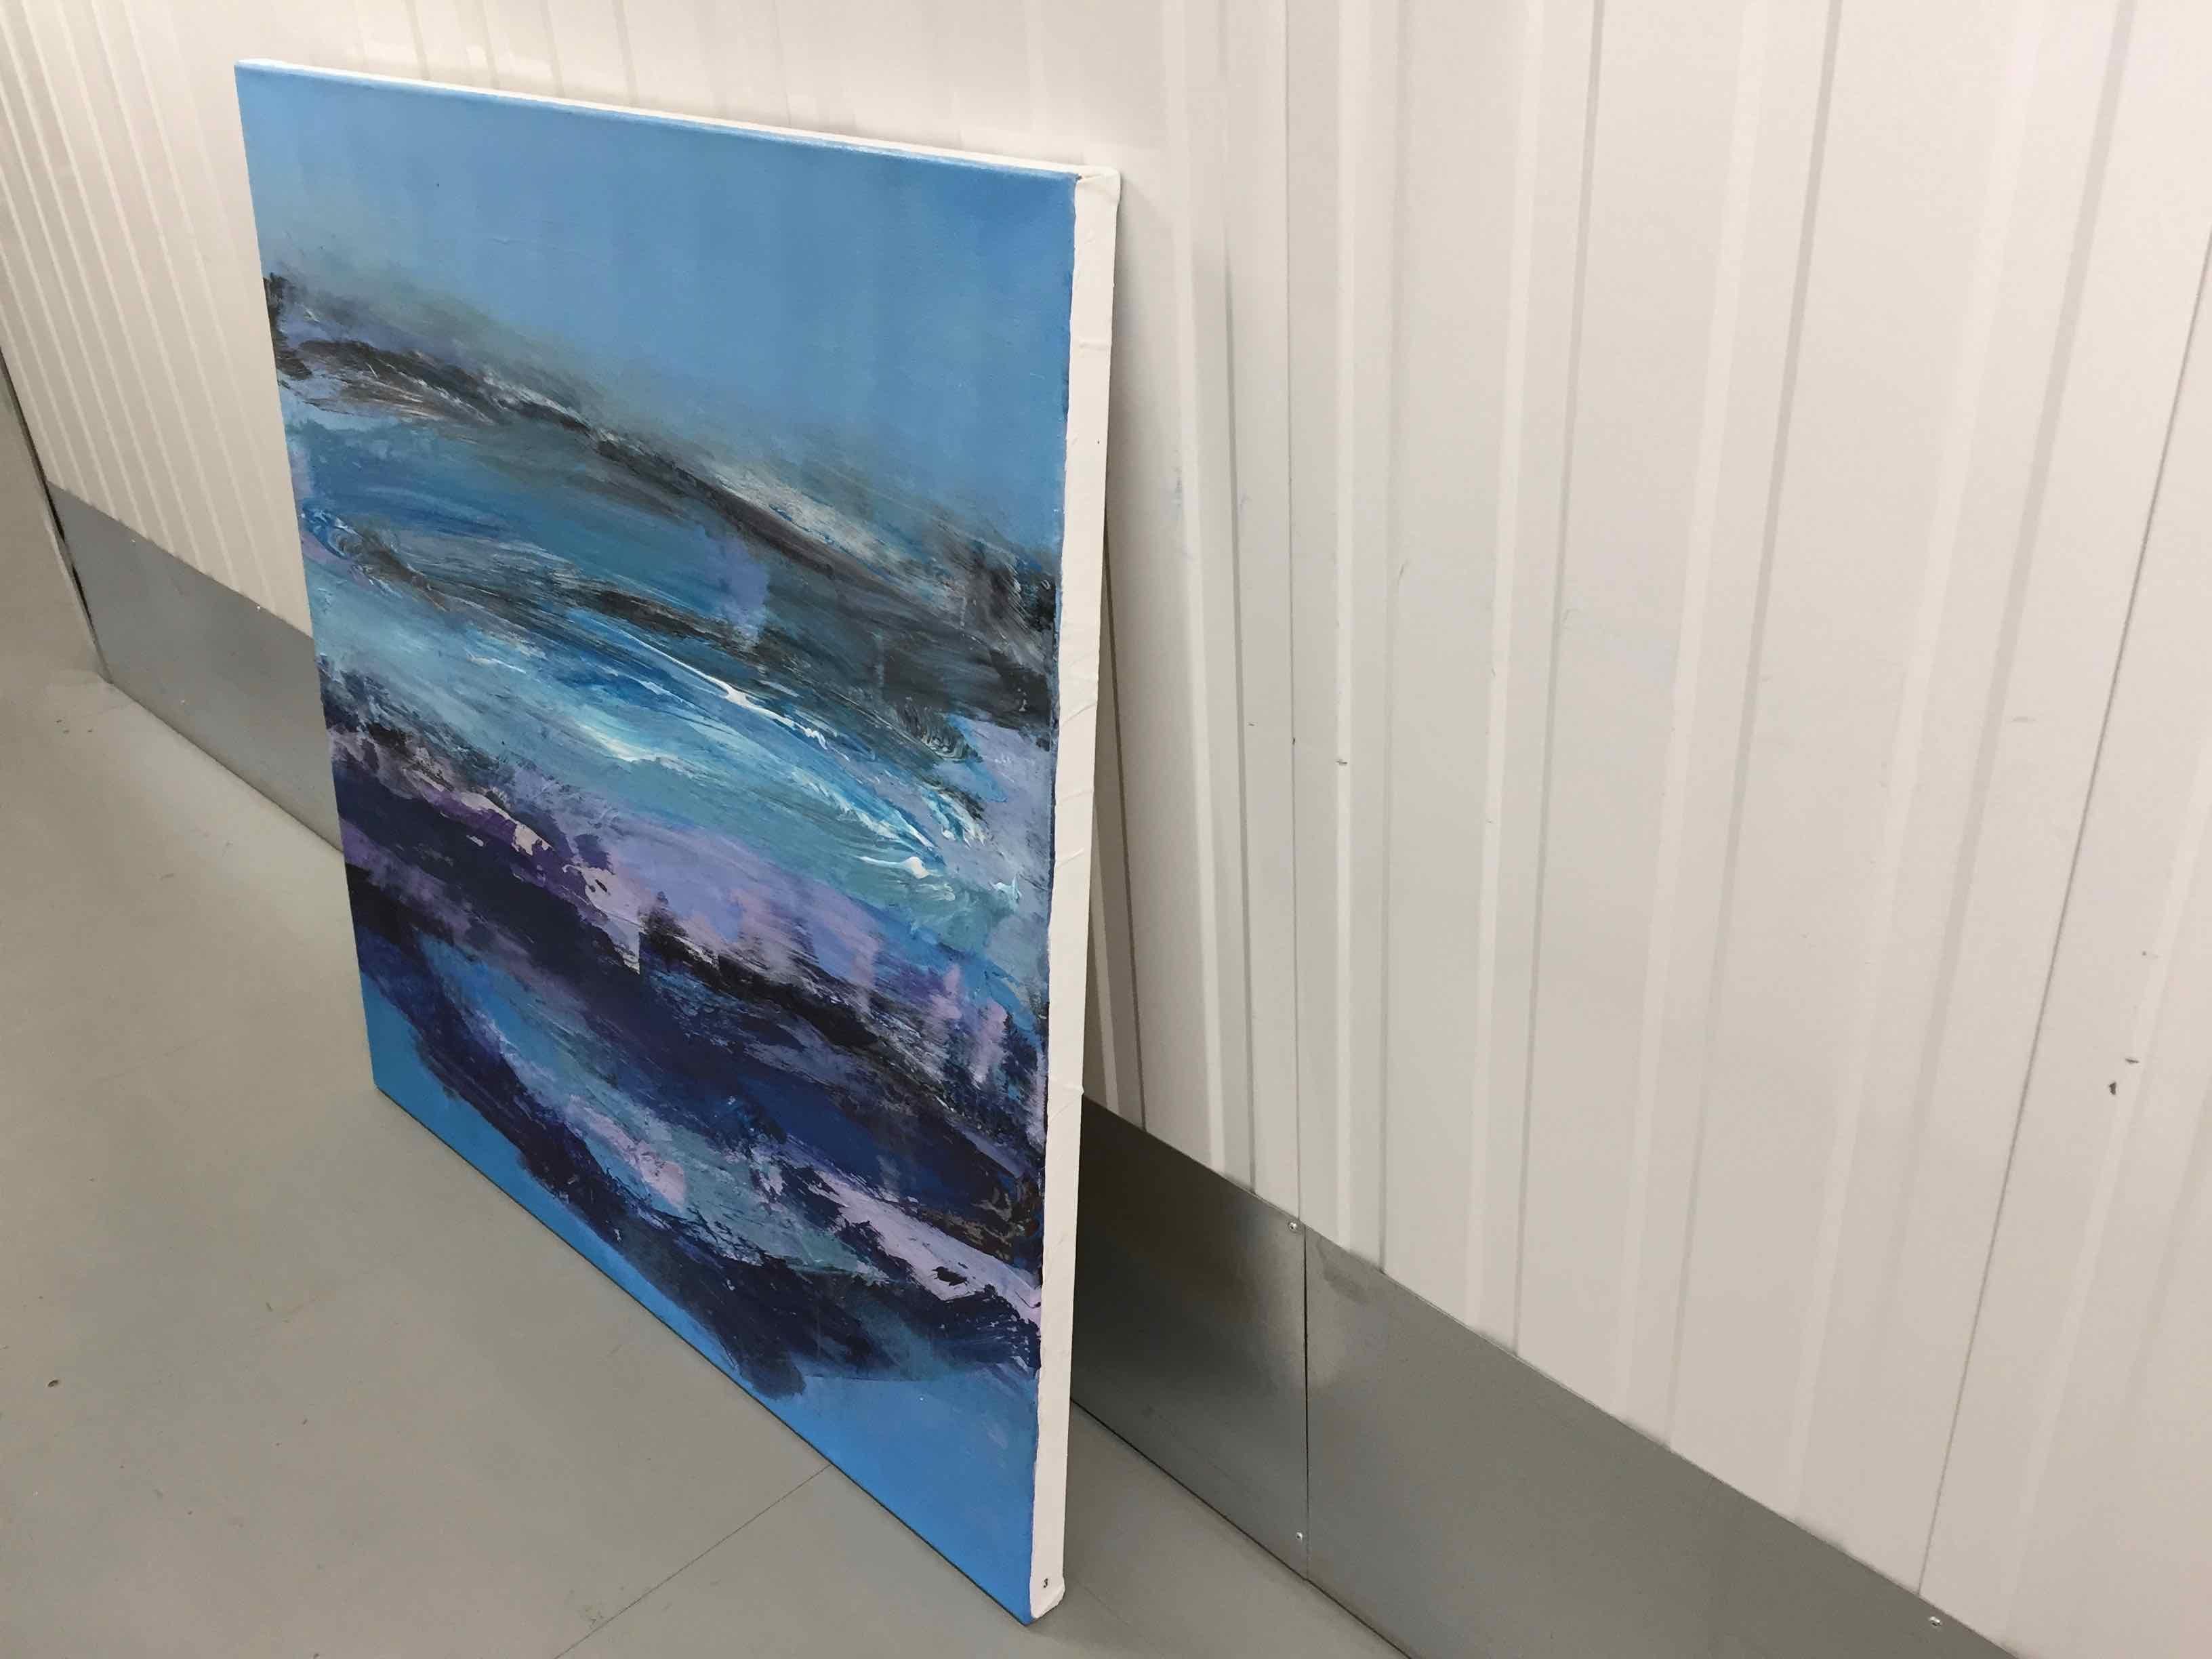 This is one of Deborah’s large, vibrant and energetic works on canvas, painted on the floor and wall, using her whole body.  Since her first emergence in the 1990's Deborah Lanyon's practice has taken a slight turn in direction over the last couple